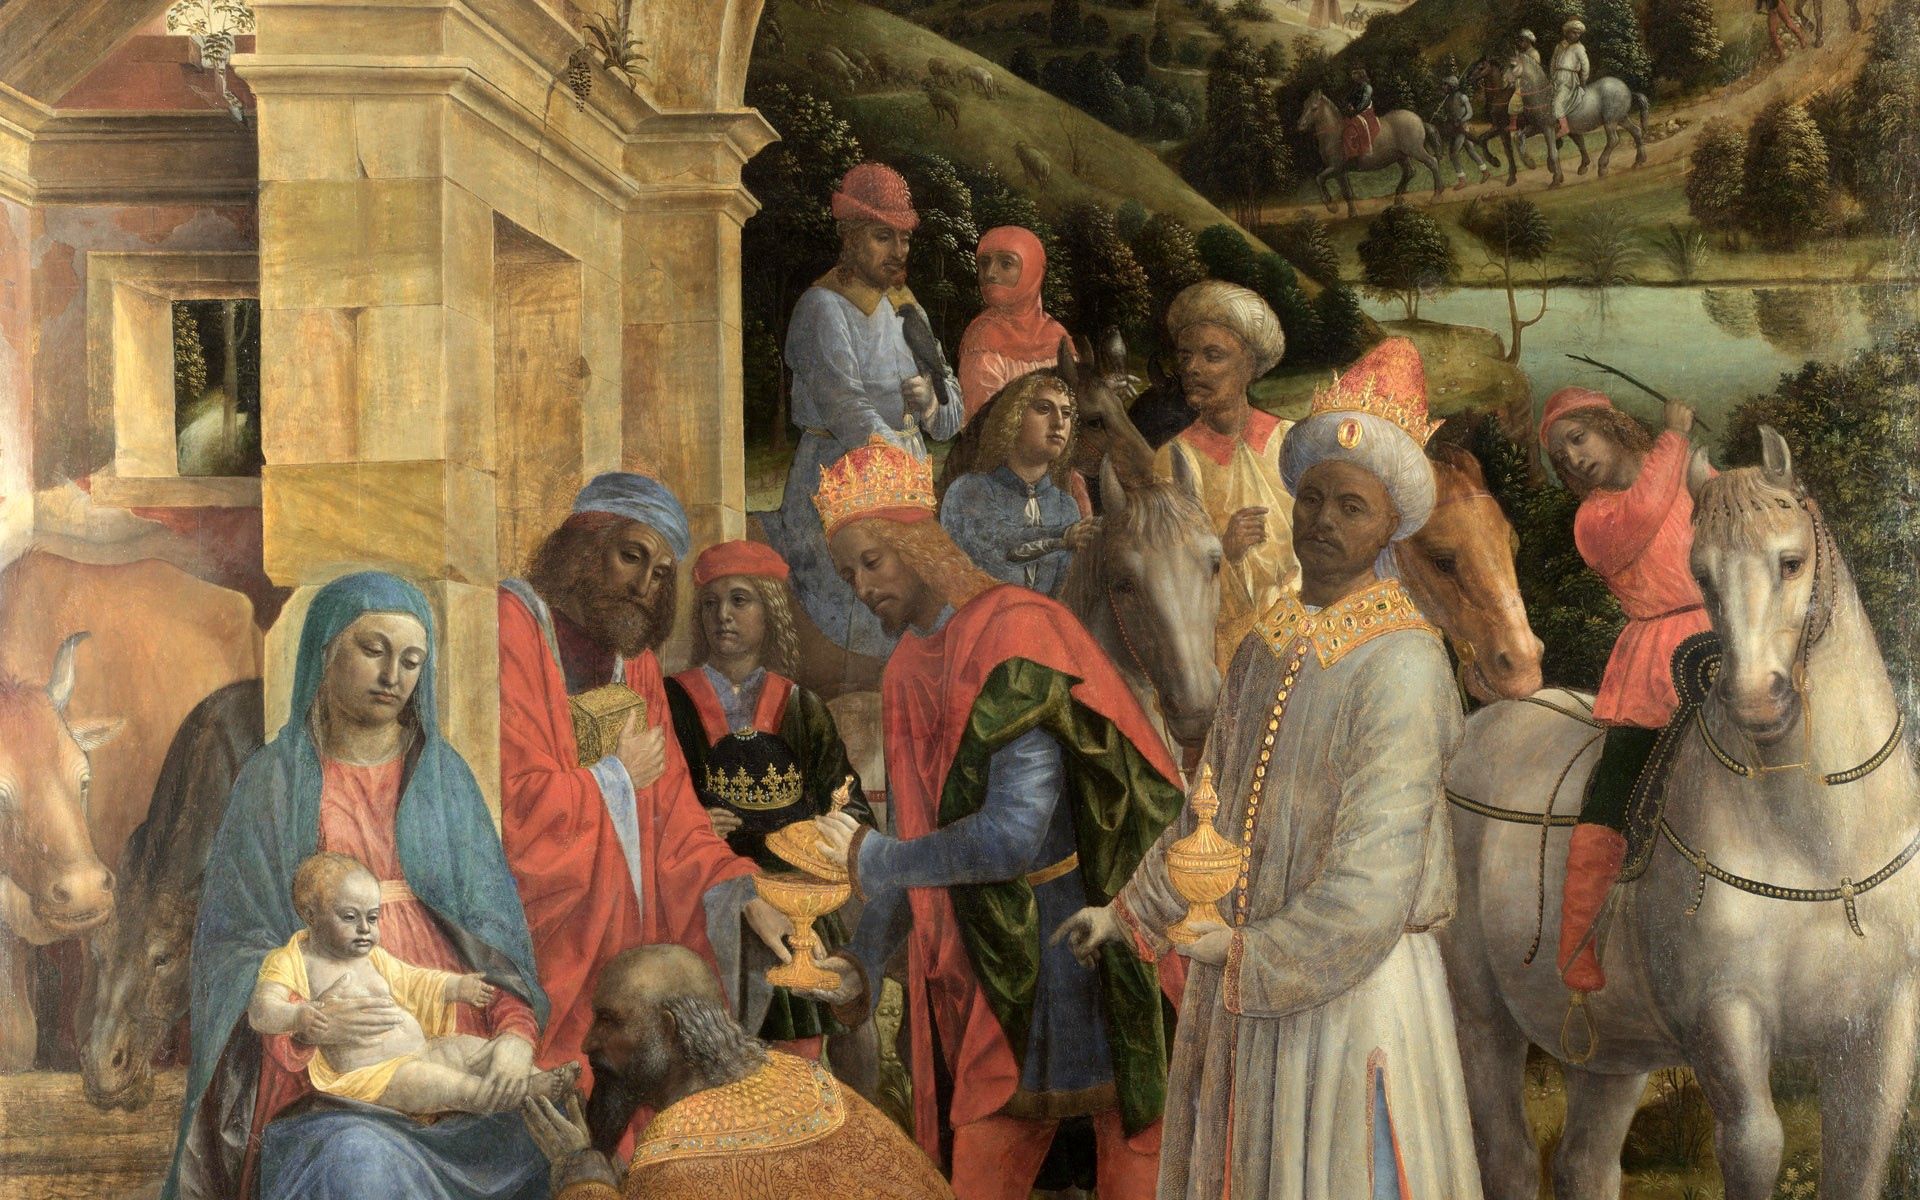 picture, canvas, miscellanea, miscellaneous, butter, oil, adoration of kings by vincenzo foppa, worship of the kings of vincenzo foppa wallpaper for mobile